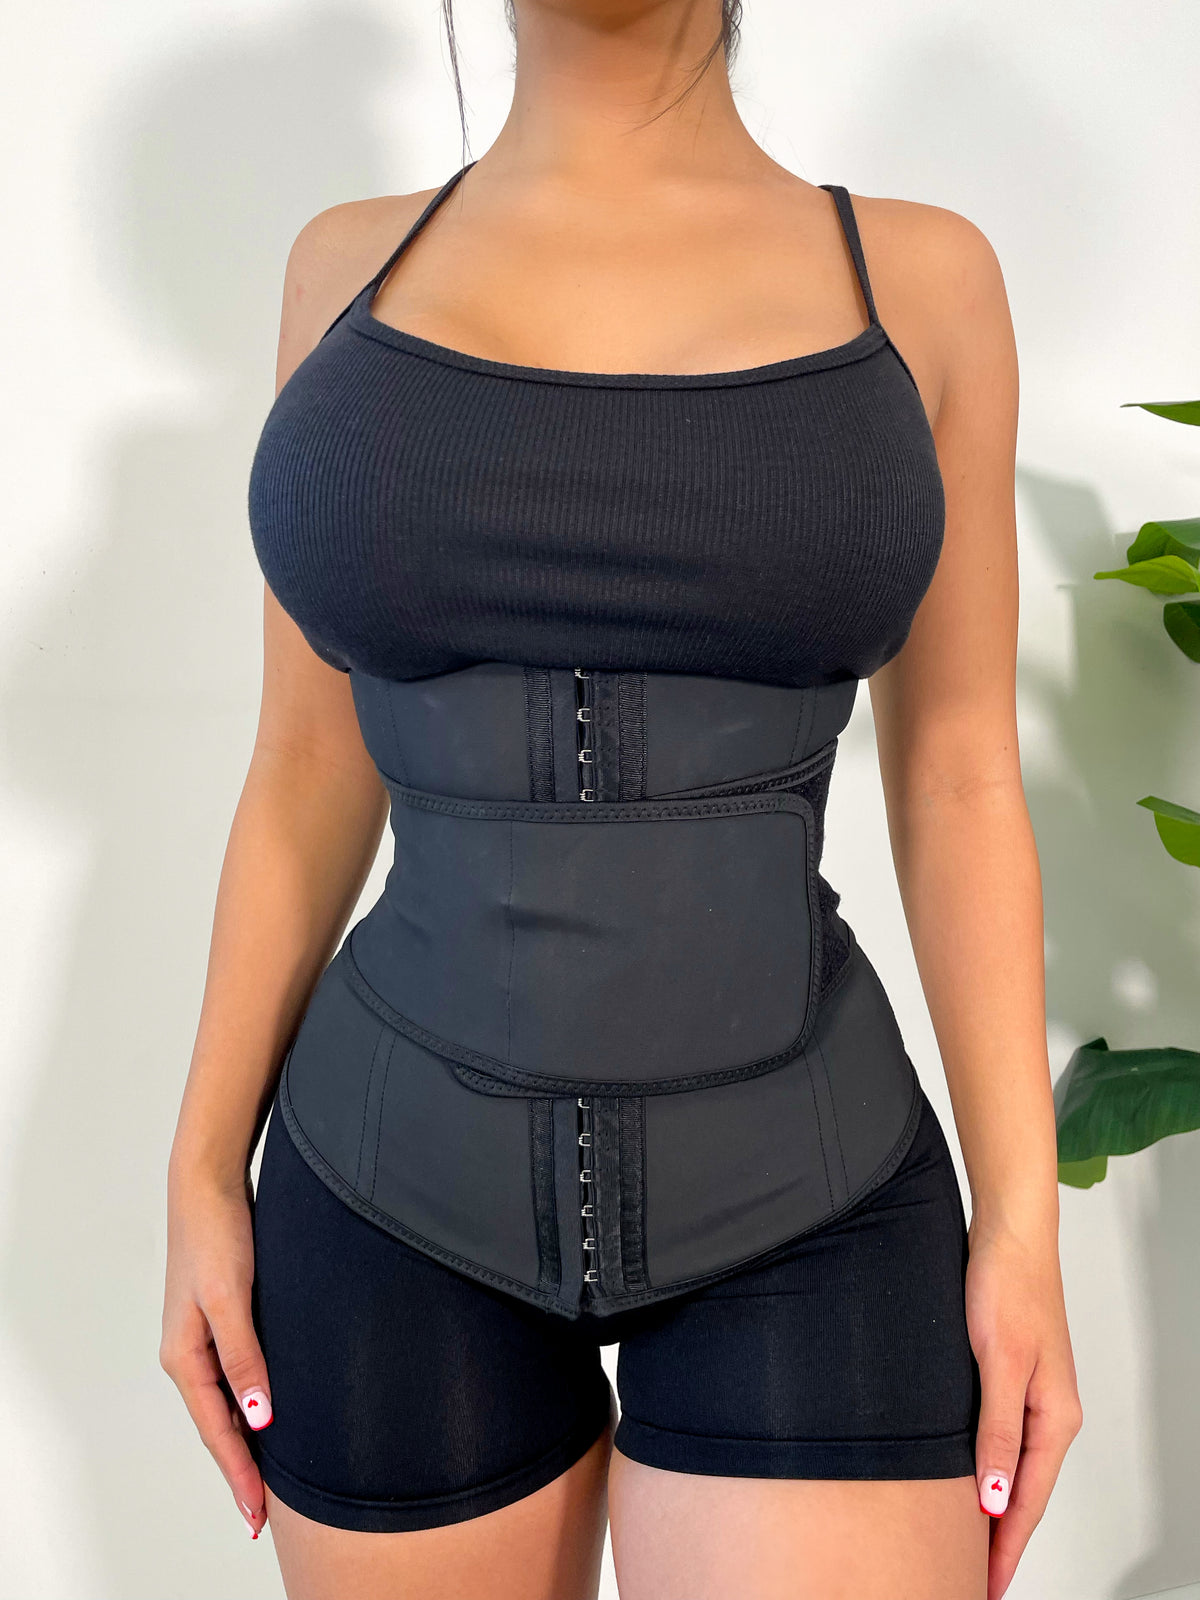 Amara Couture - Introducing our Waspie X Corset. This one offers more  coverage for the girls with a tiny waist and wide hip. She makes look so  perfect 😍 #alteregoclothing #corset #curves #